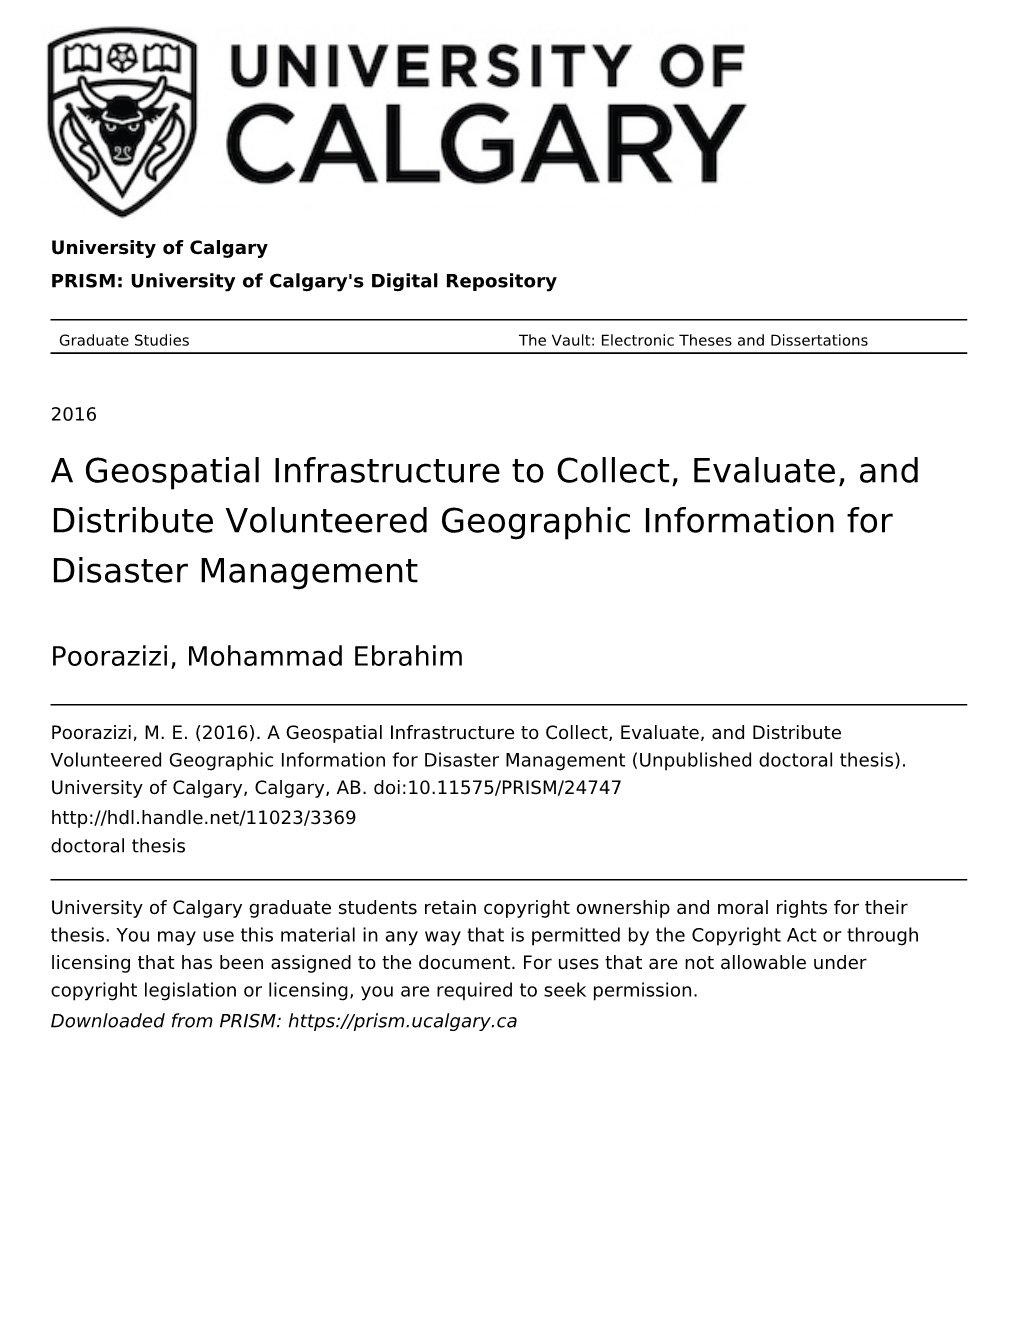 A Geospatial Infrastructure to Collect, Evaluate, and Distribute Volunteered Geographic Information for Disaster Management